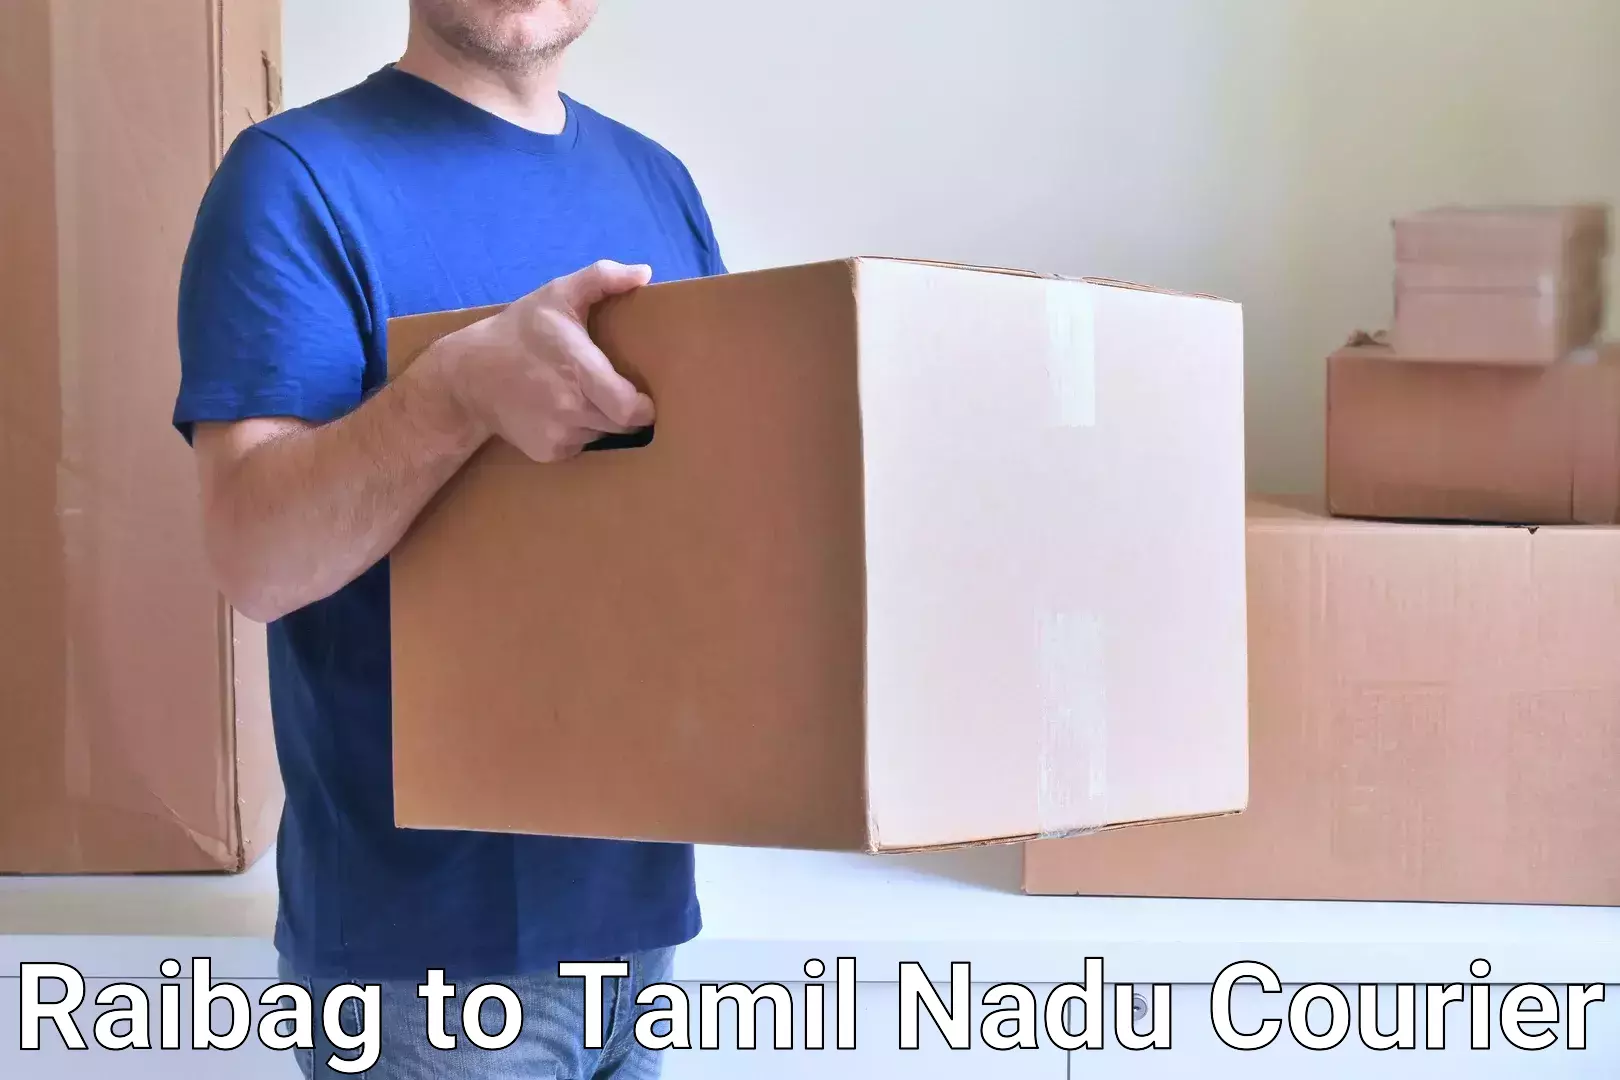 Fast delivery service Raibag to Chennai Port